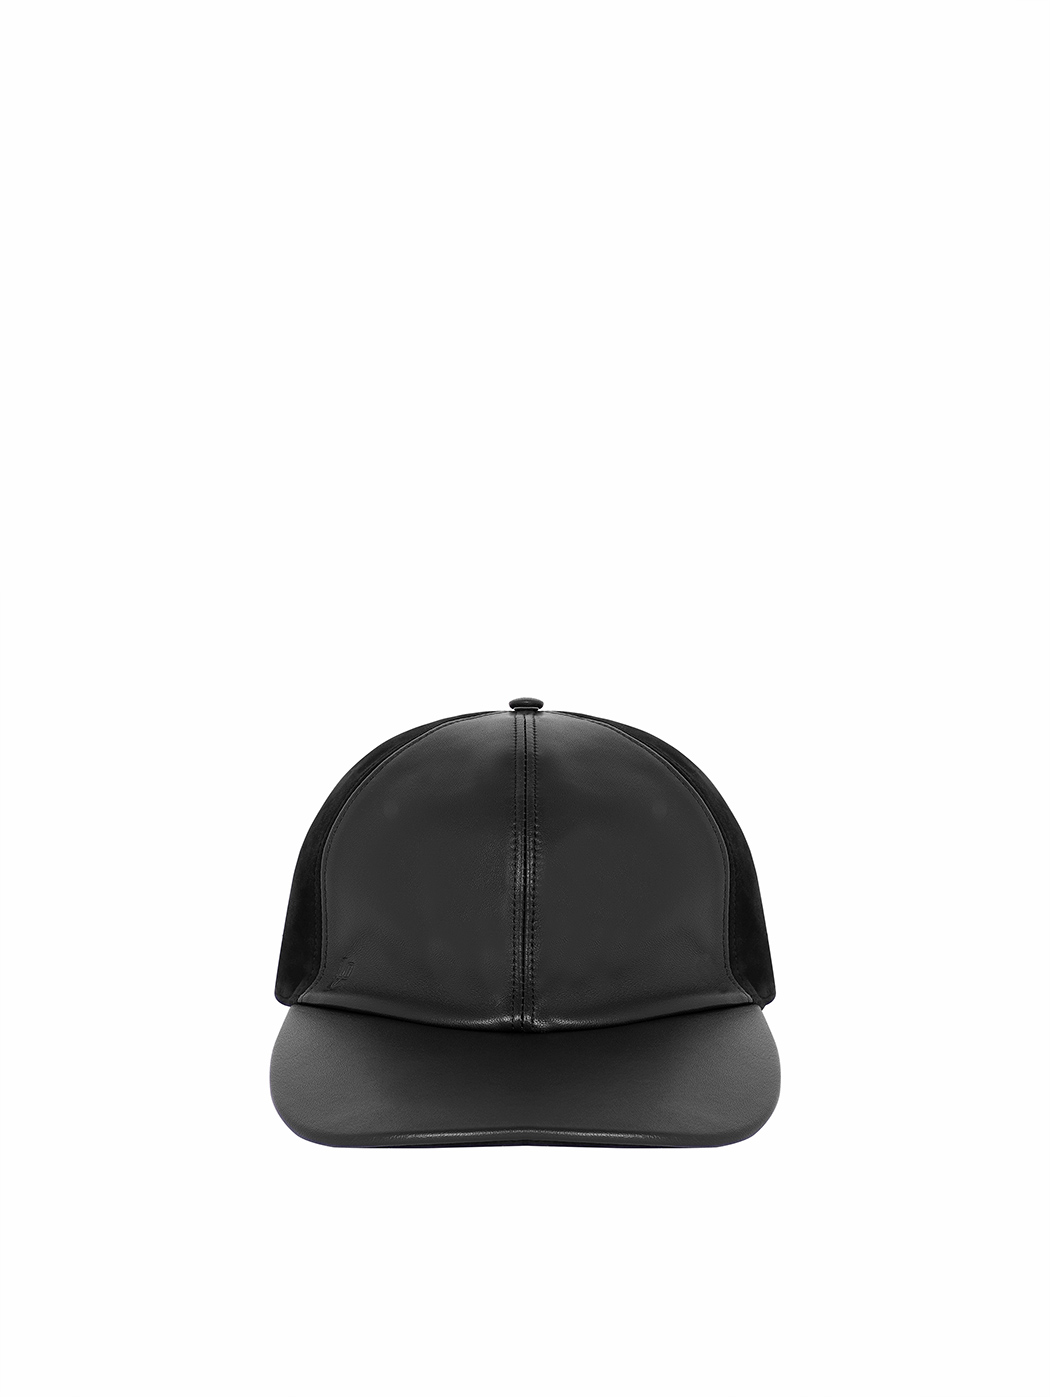 Black Baseball hat in leather and suede